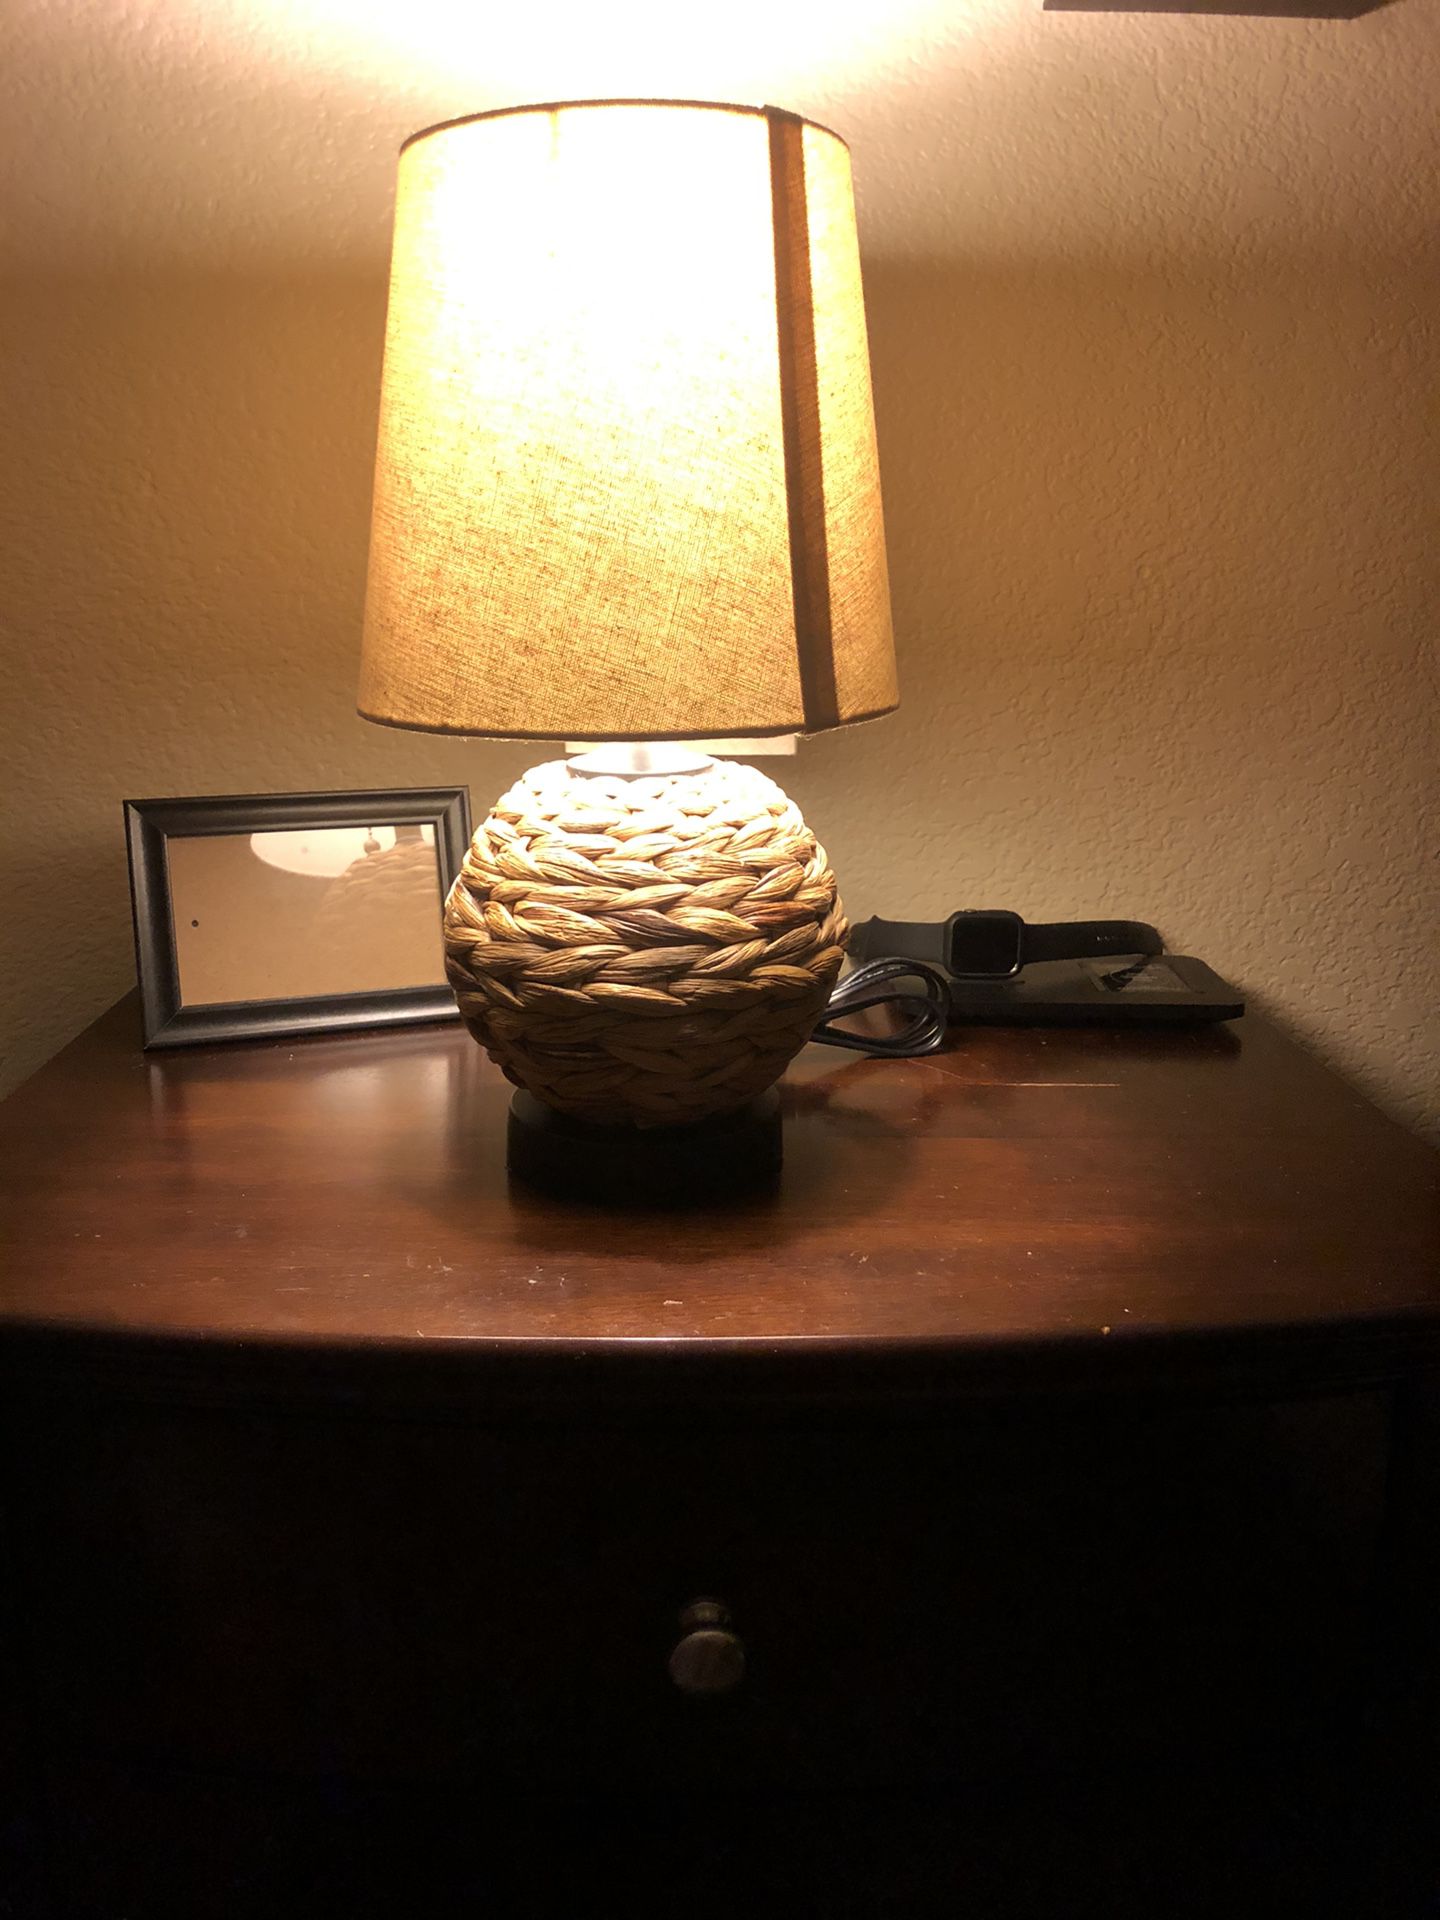 Round Wicker Table Lamp